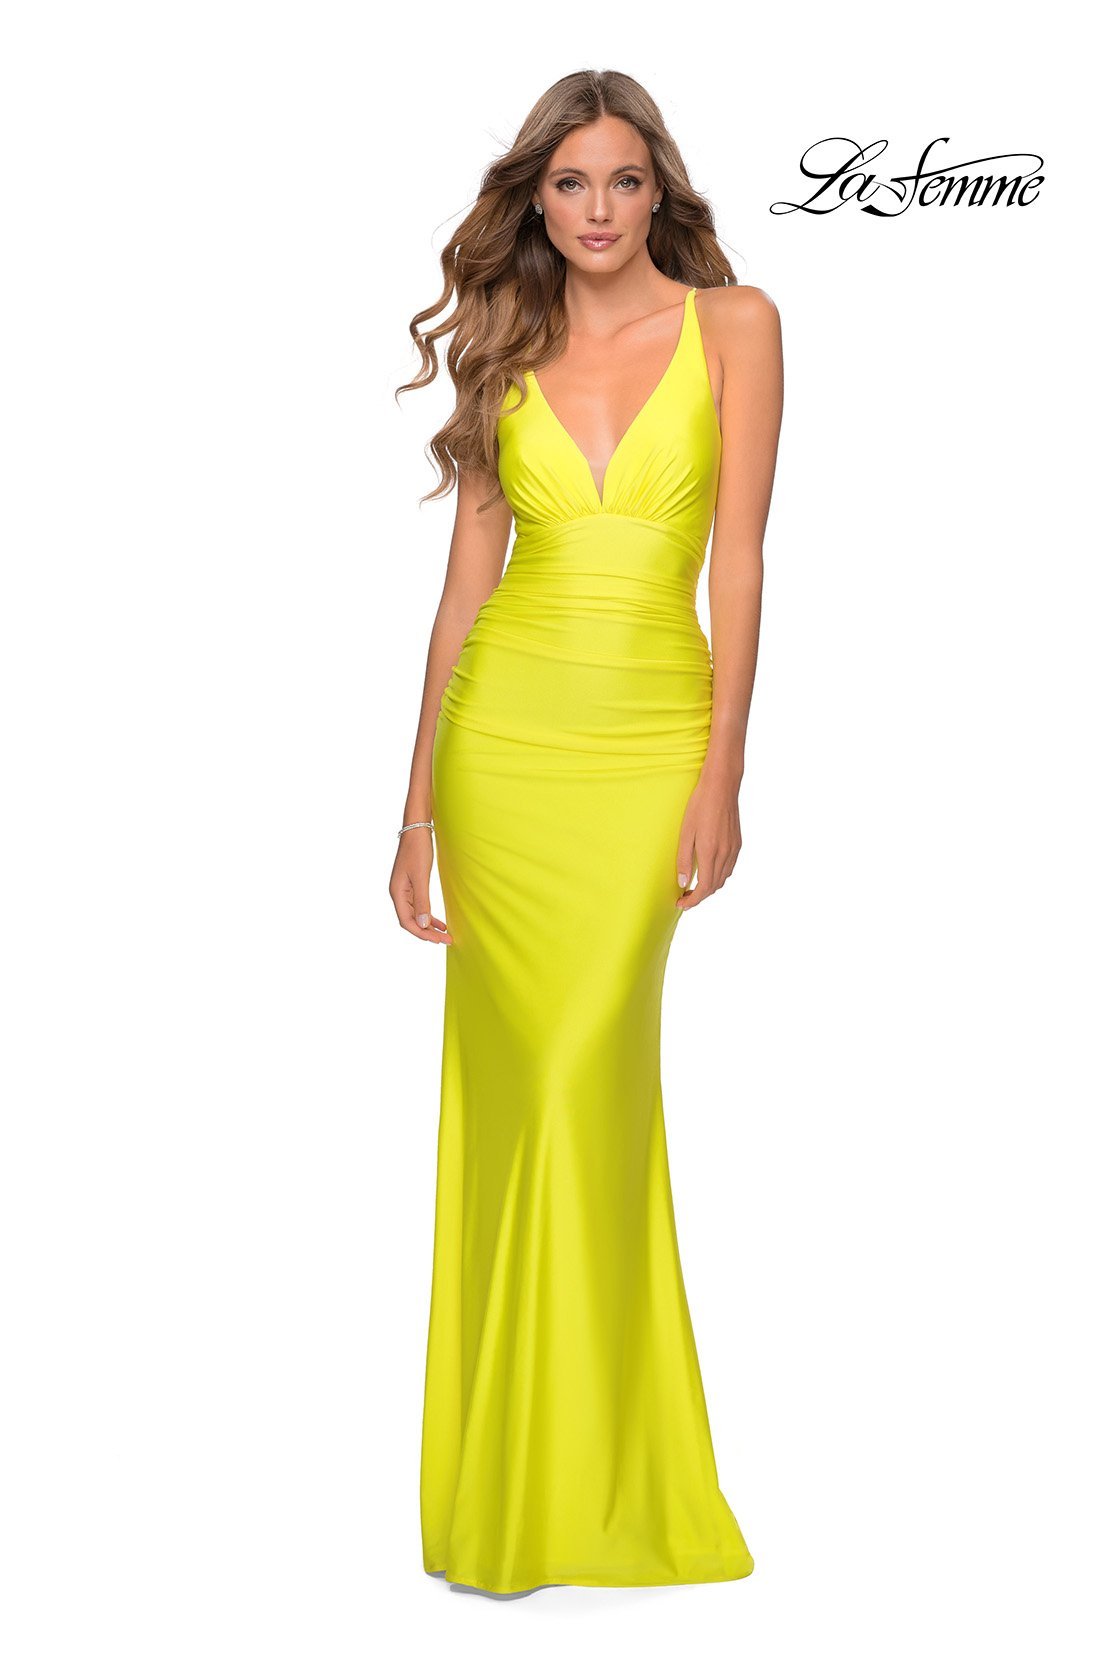 La Femme 28297 dress images in these colors: Black, Dark Berry, Neon Pink, Royal Blue, Yellow.